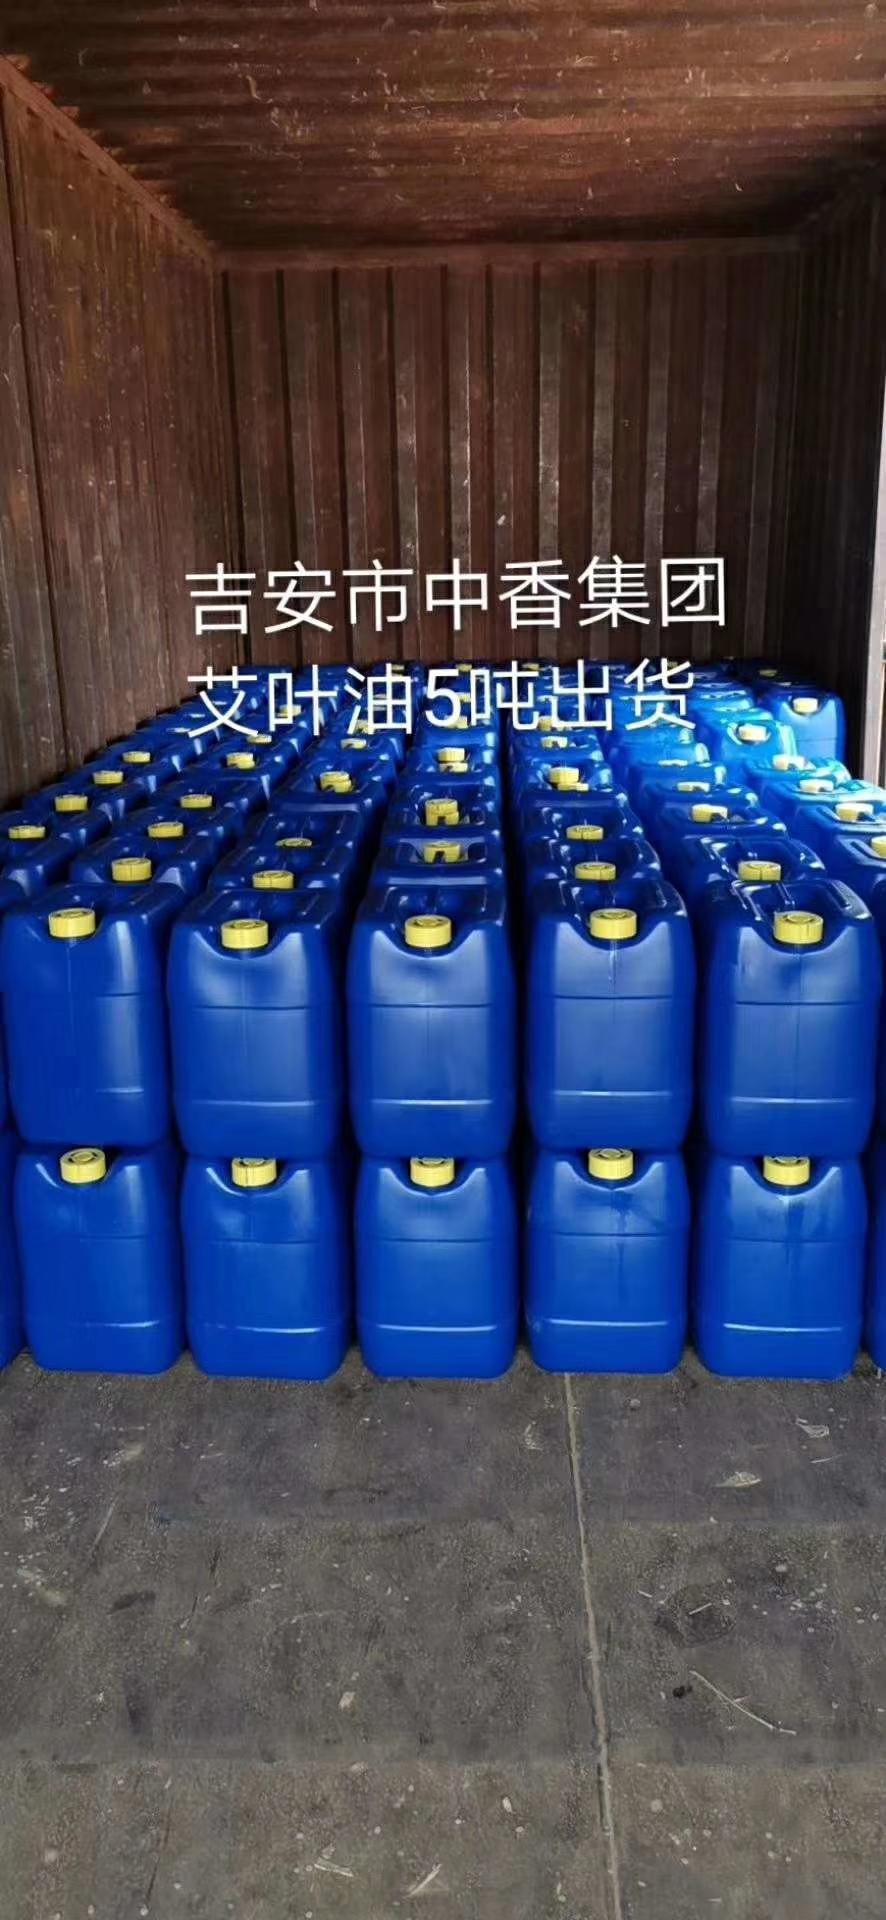 Factory supply 99% eugenol oil for pharma use